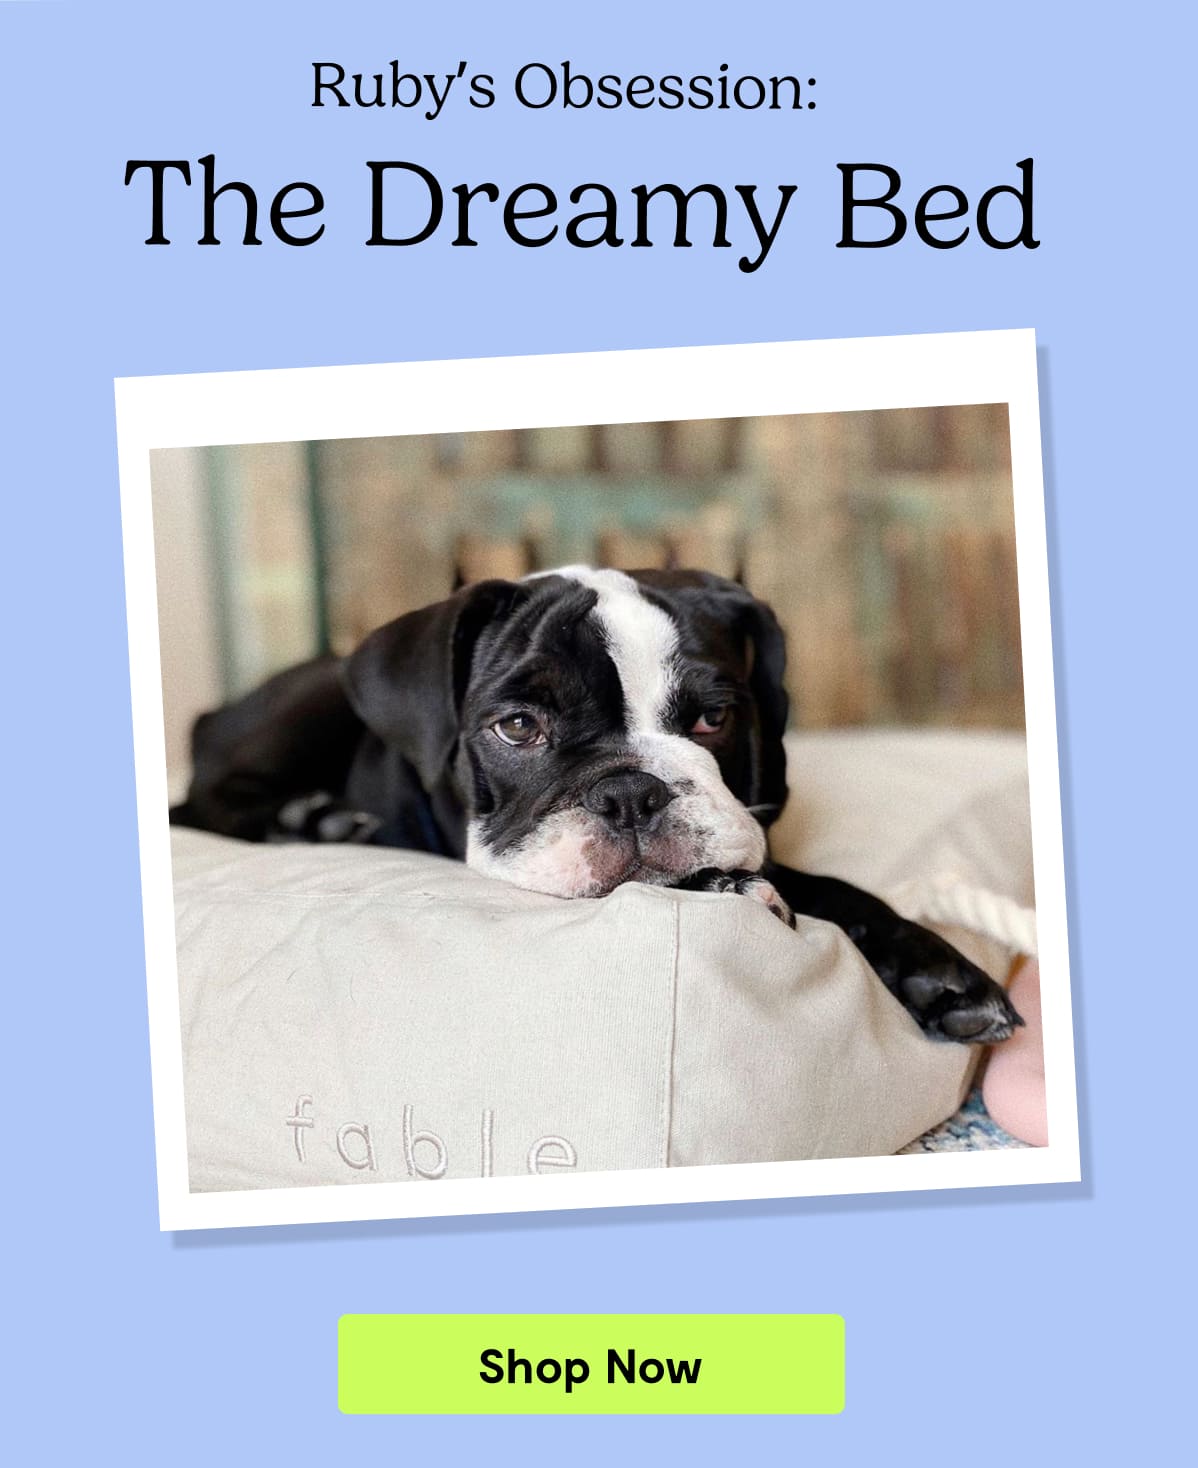 Ruby's Obsession: The Dreamy Bed